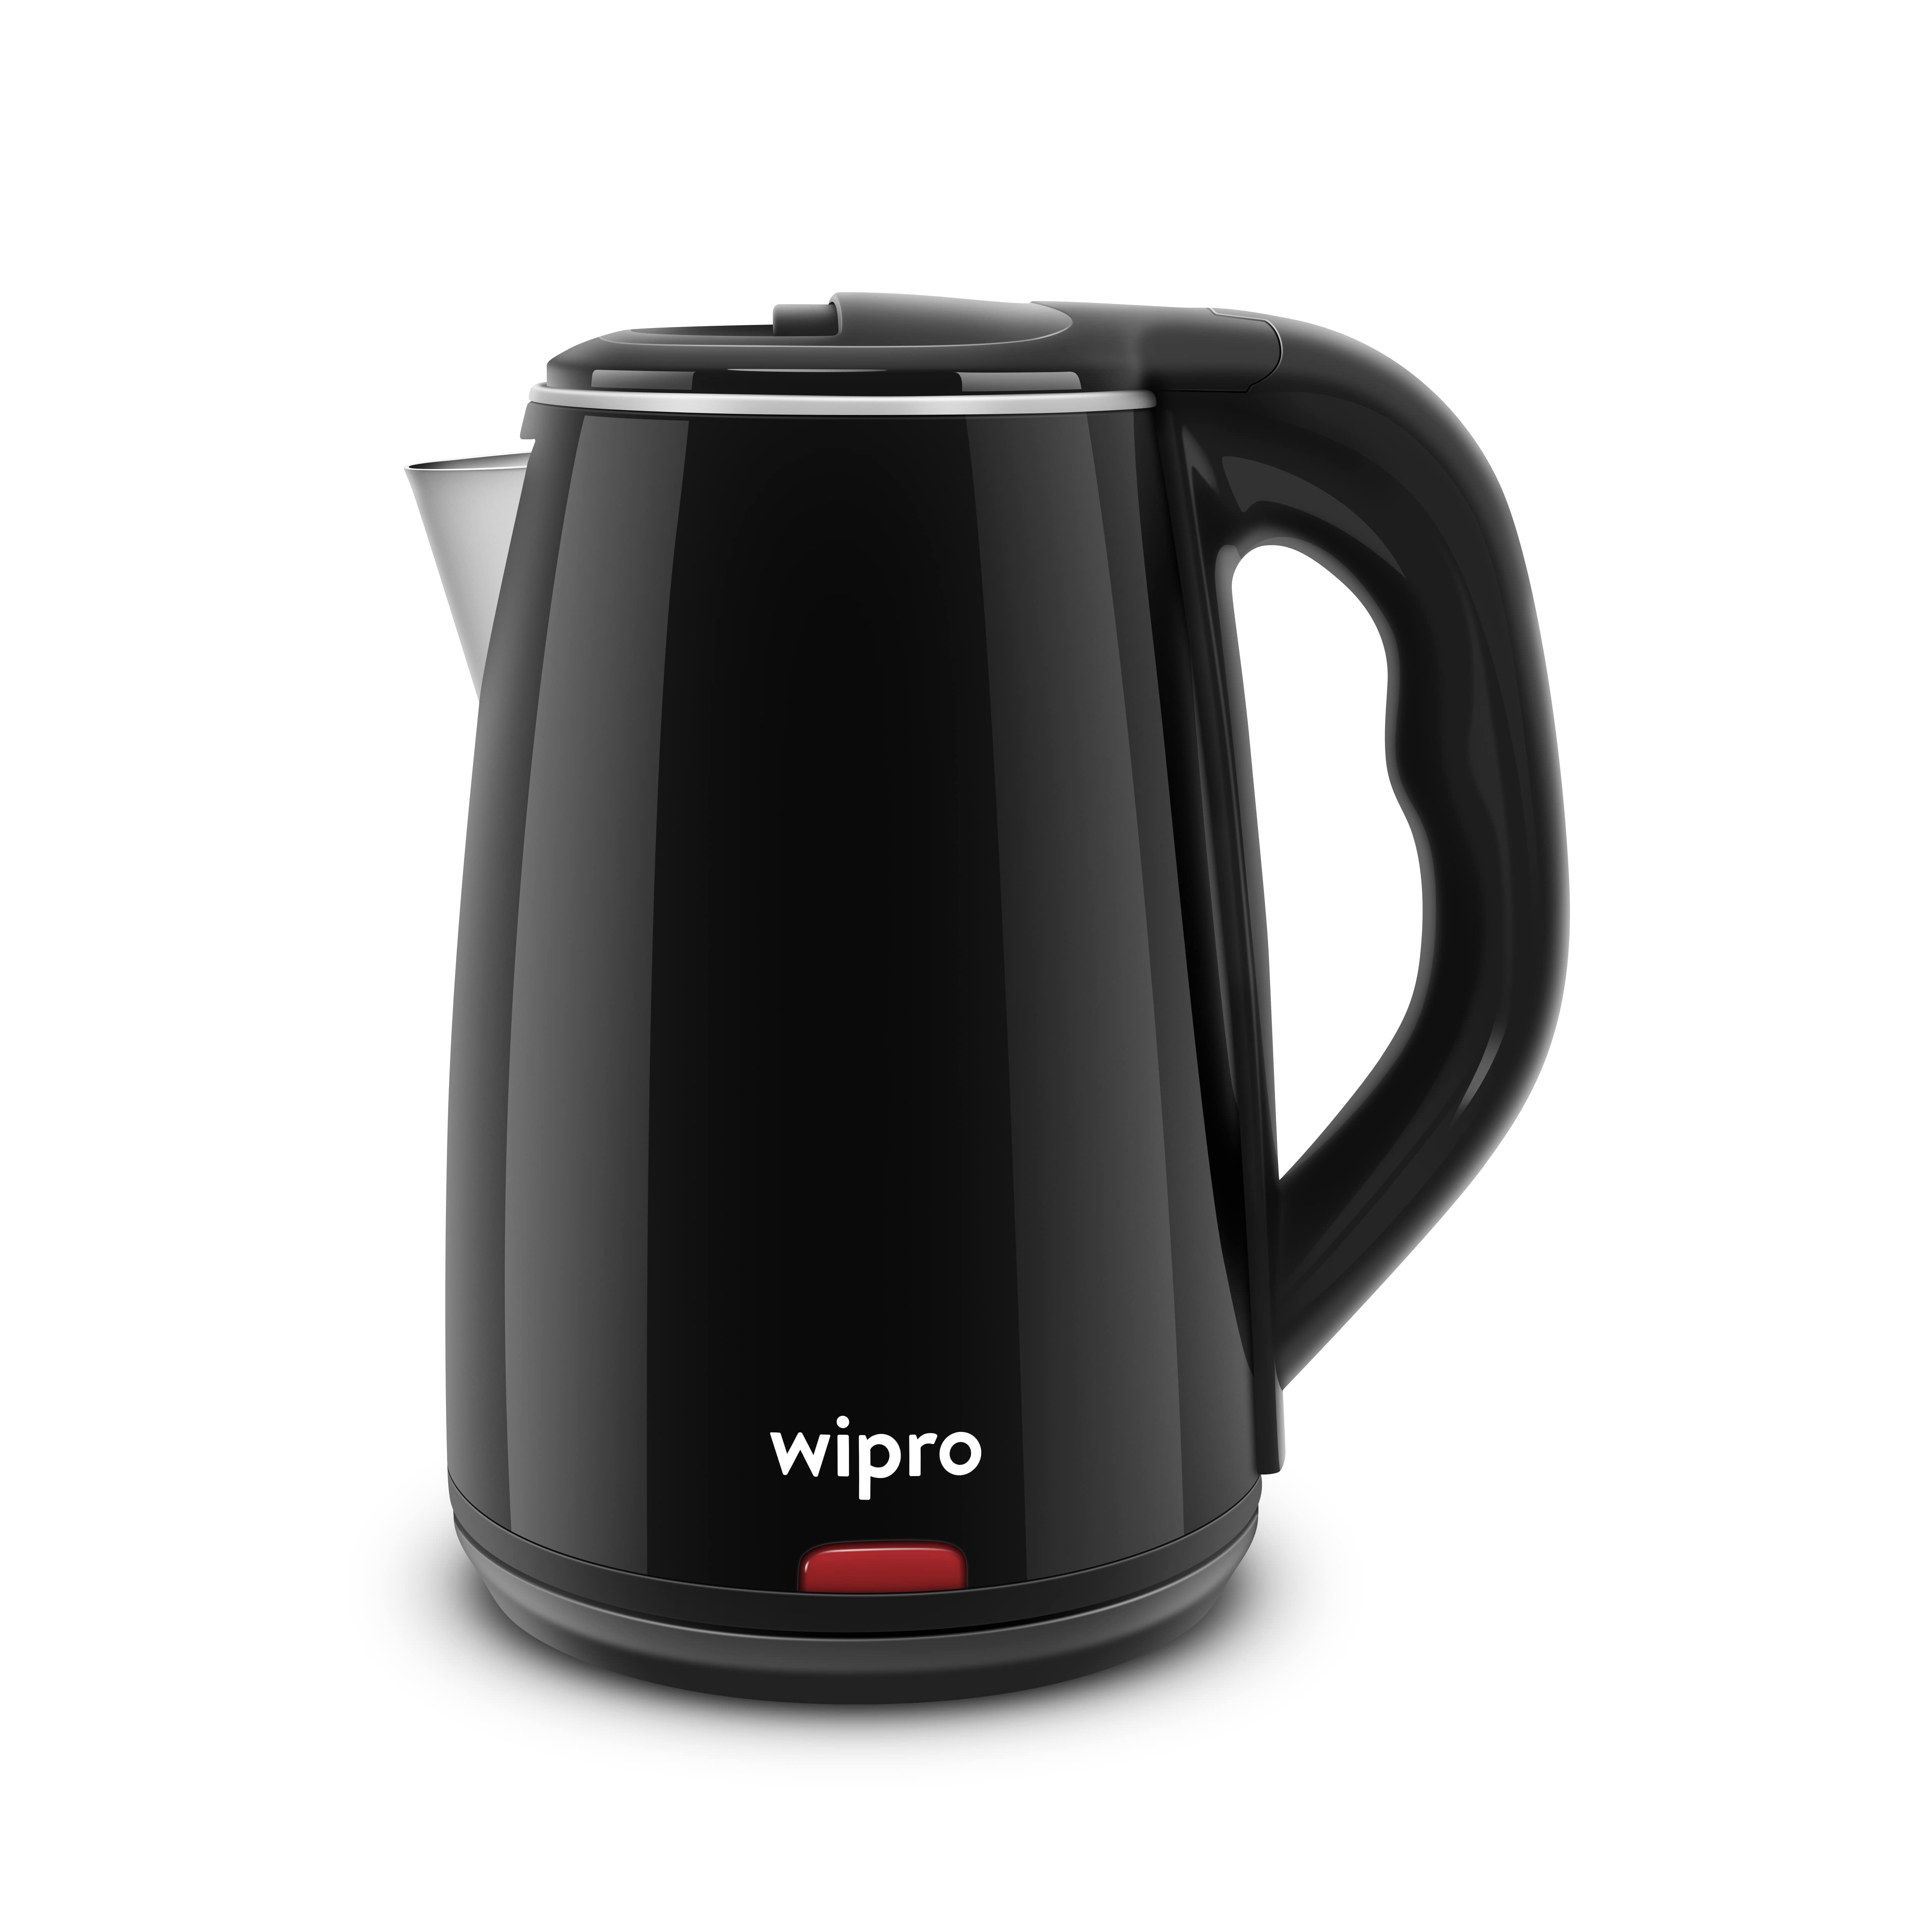 Wipro Vesta 1.8 Litre Cool touch electric Kettle with Auto cut off